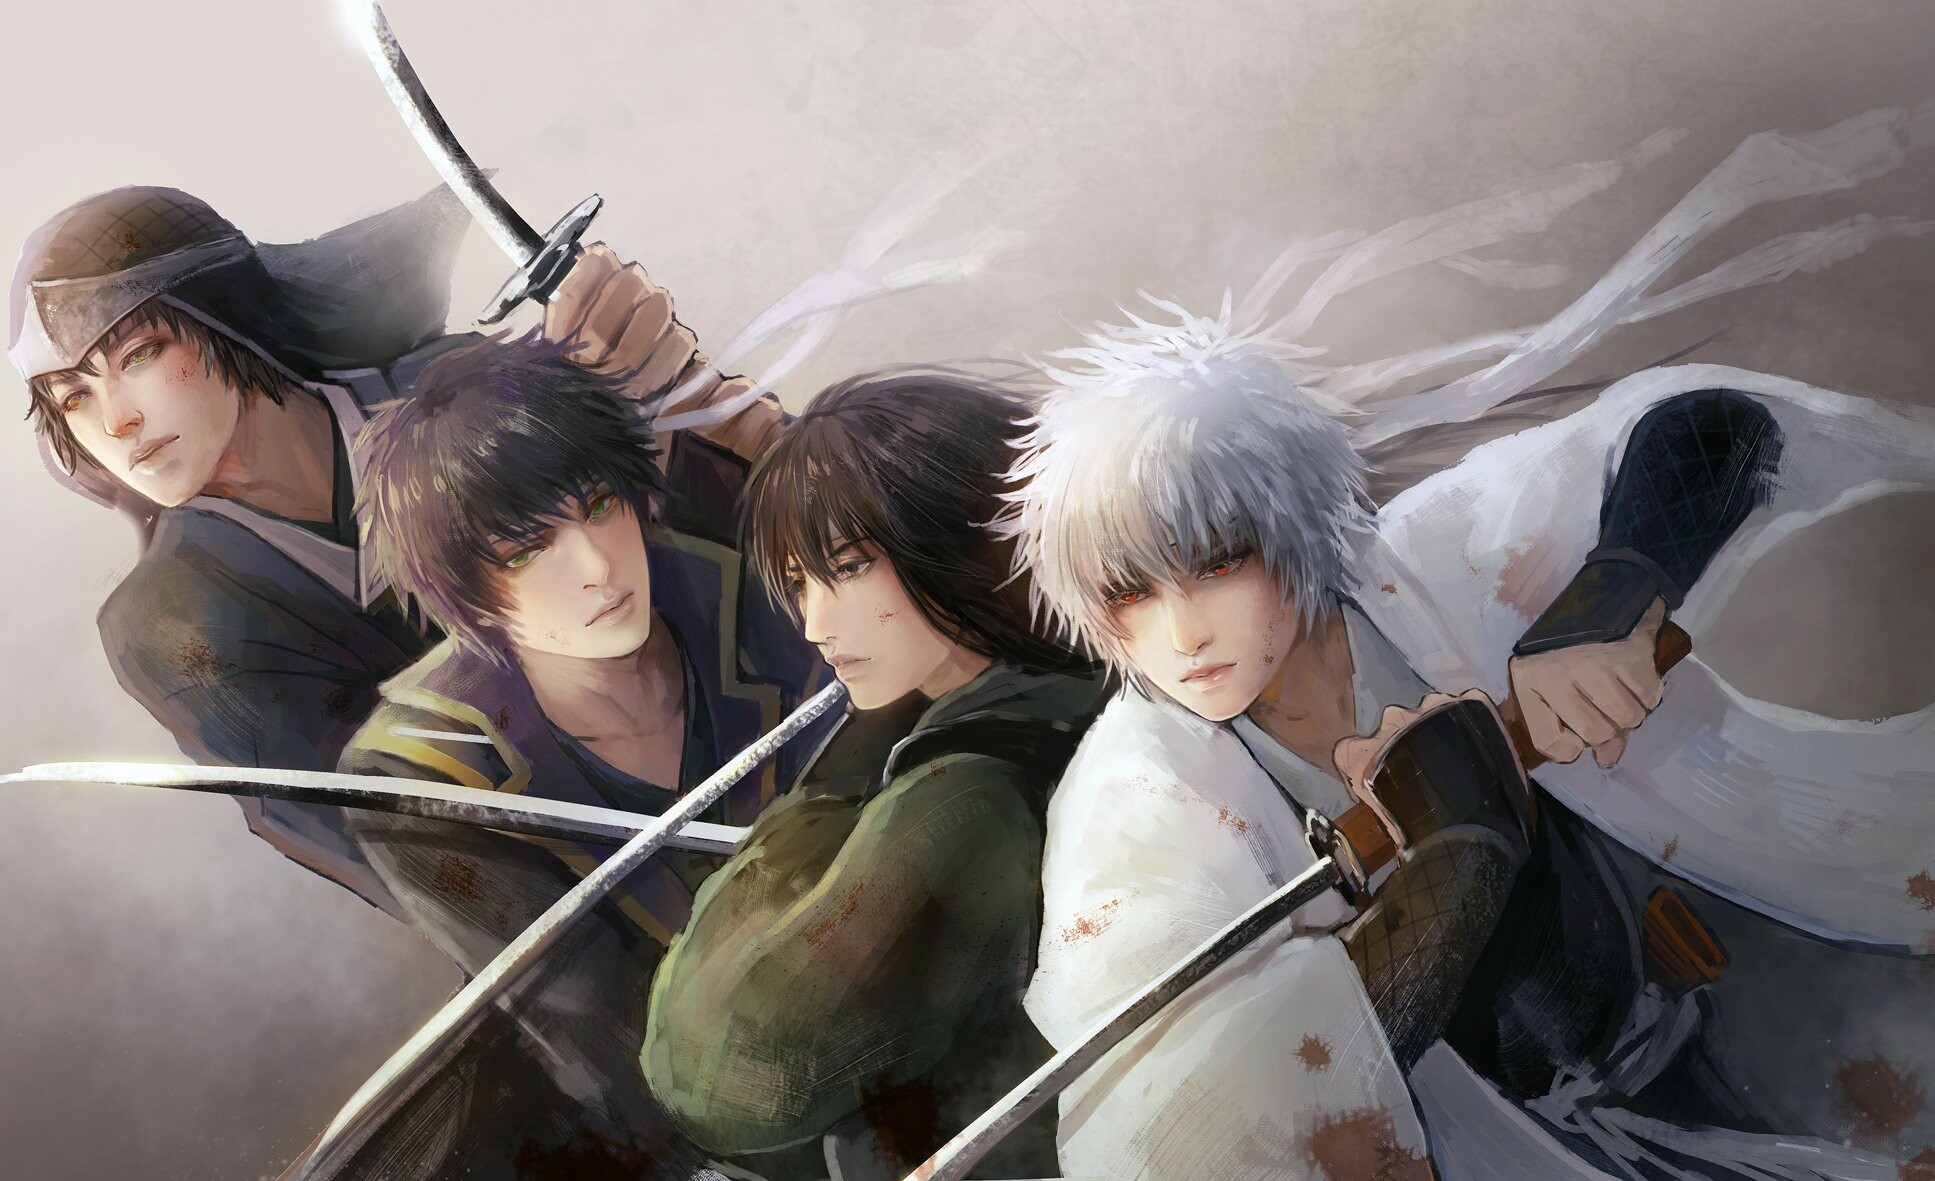 Gintoki Sakata: Katsura Kotarou, The leader of a moderate Joui faction and a fugitive wanted by the authorities. 1940x1190 HD Wallpaper.